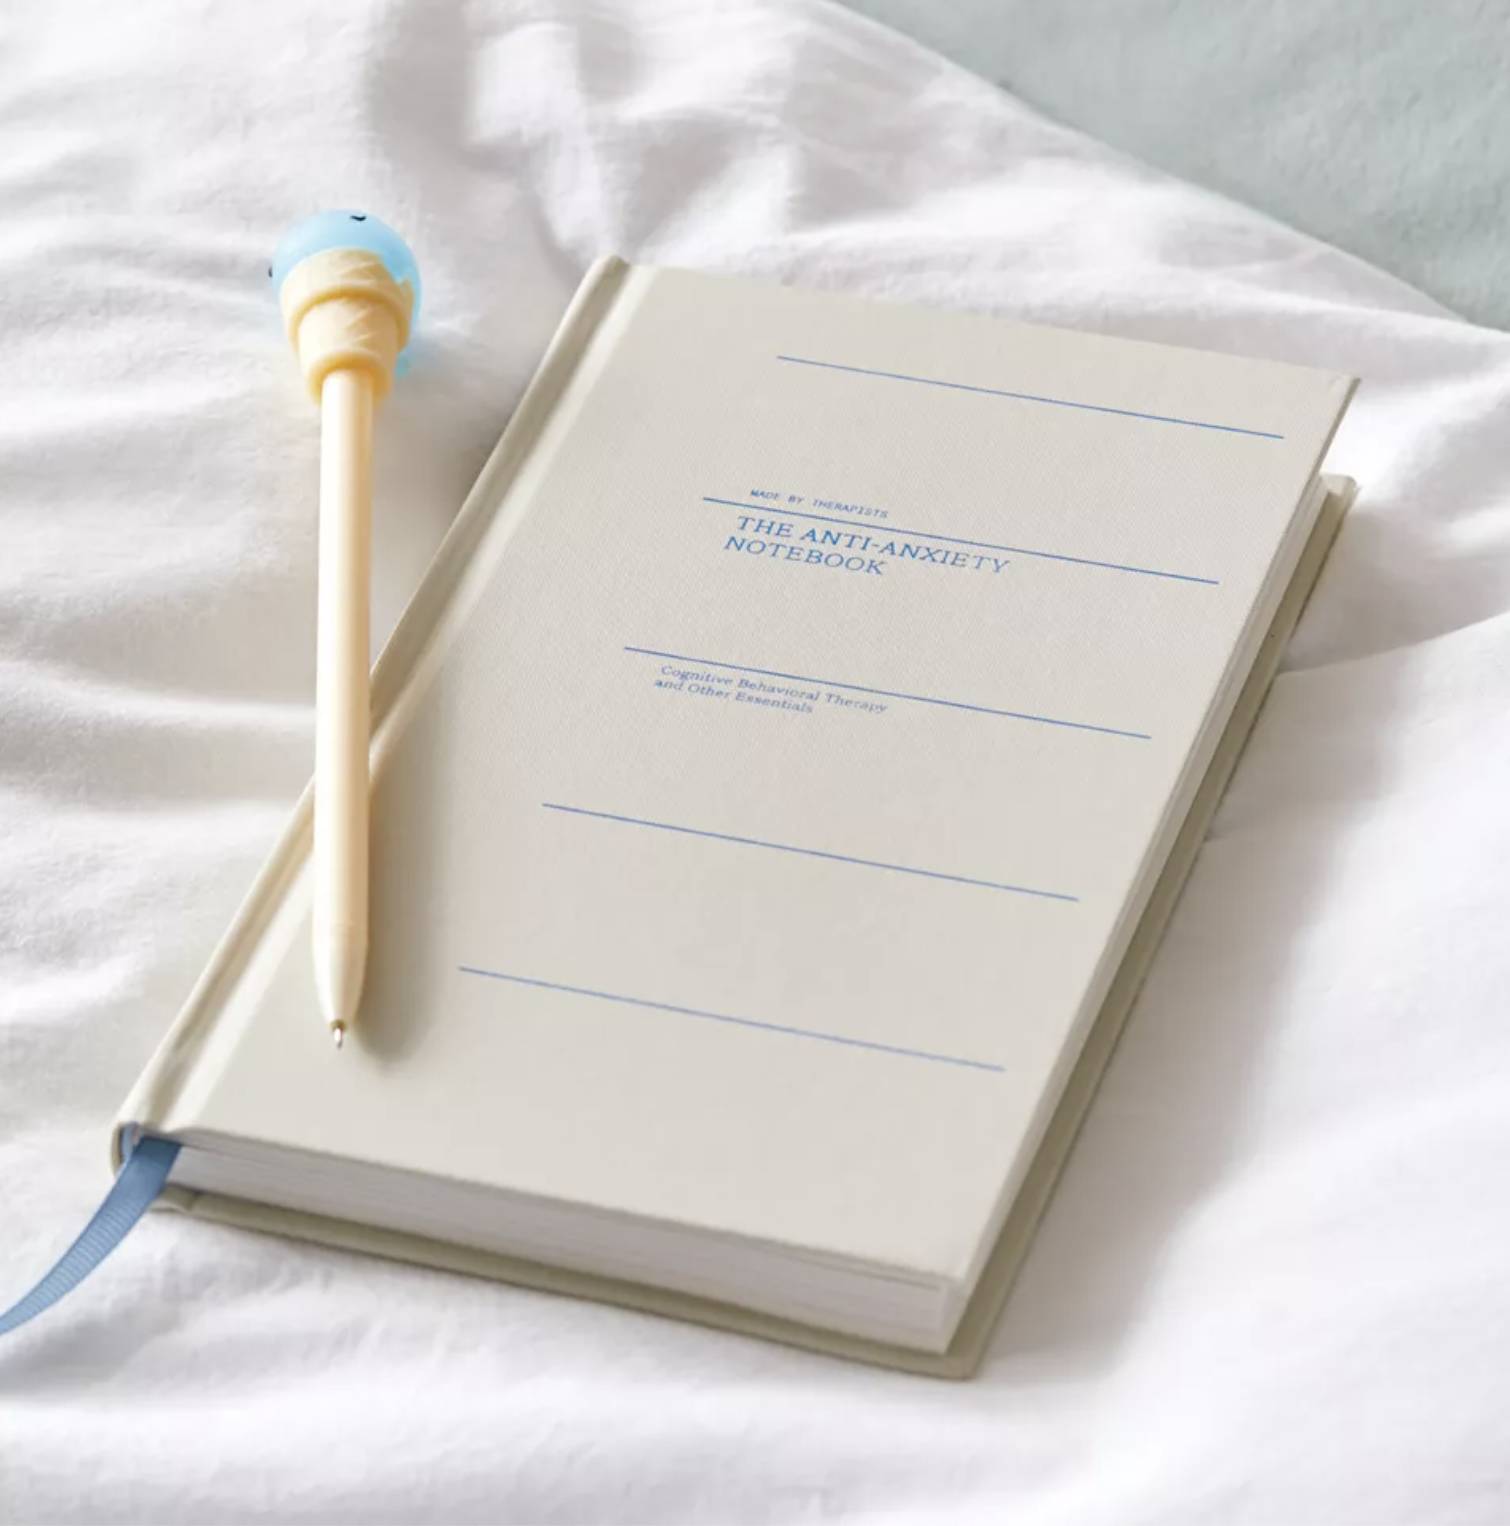 The book on a bedsheet with a pen on top of it